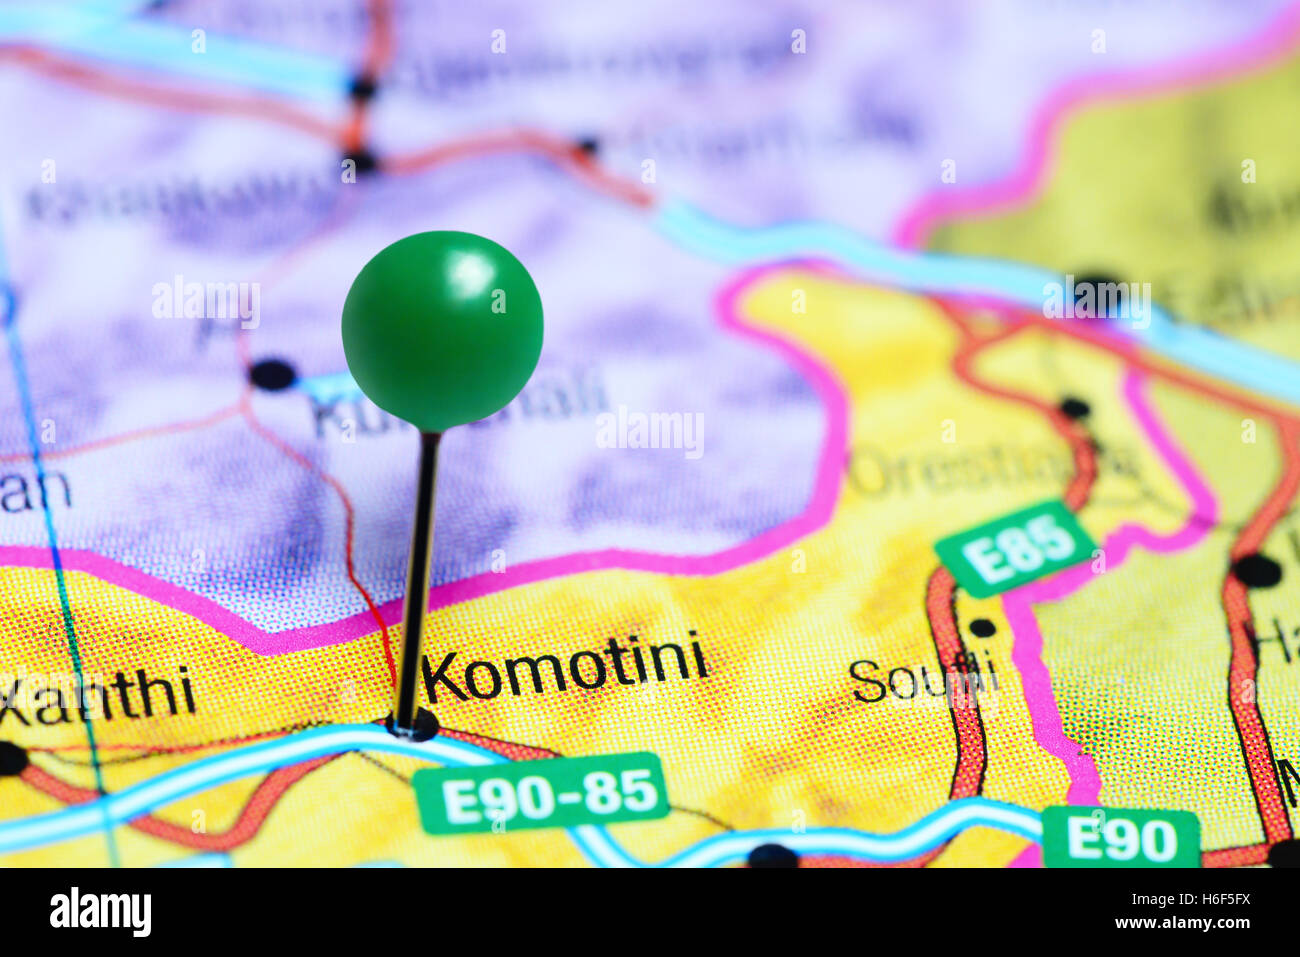 Komotini pinned on a map of Greece Stock Photo